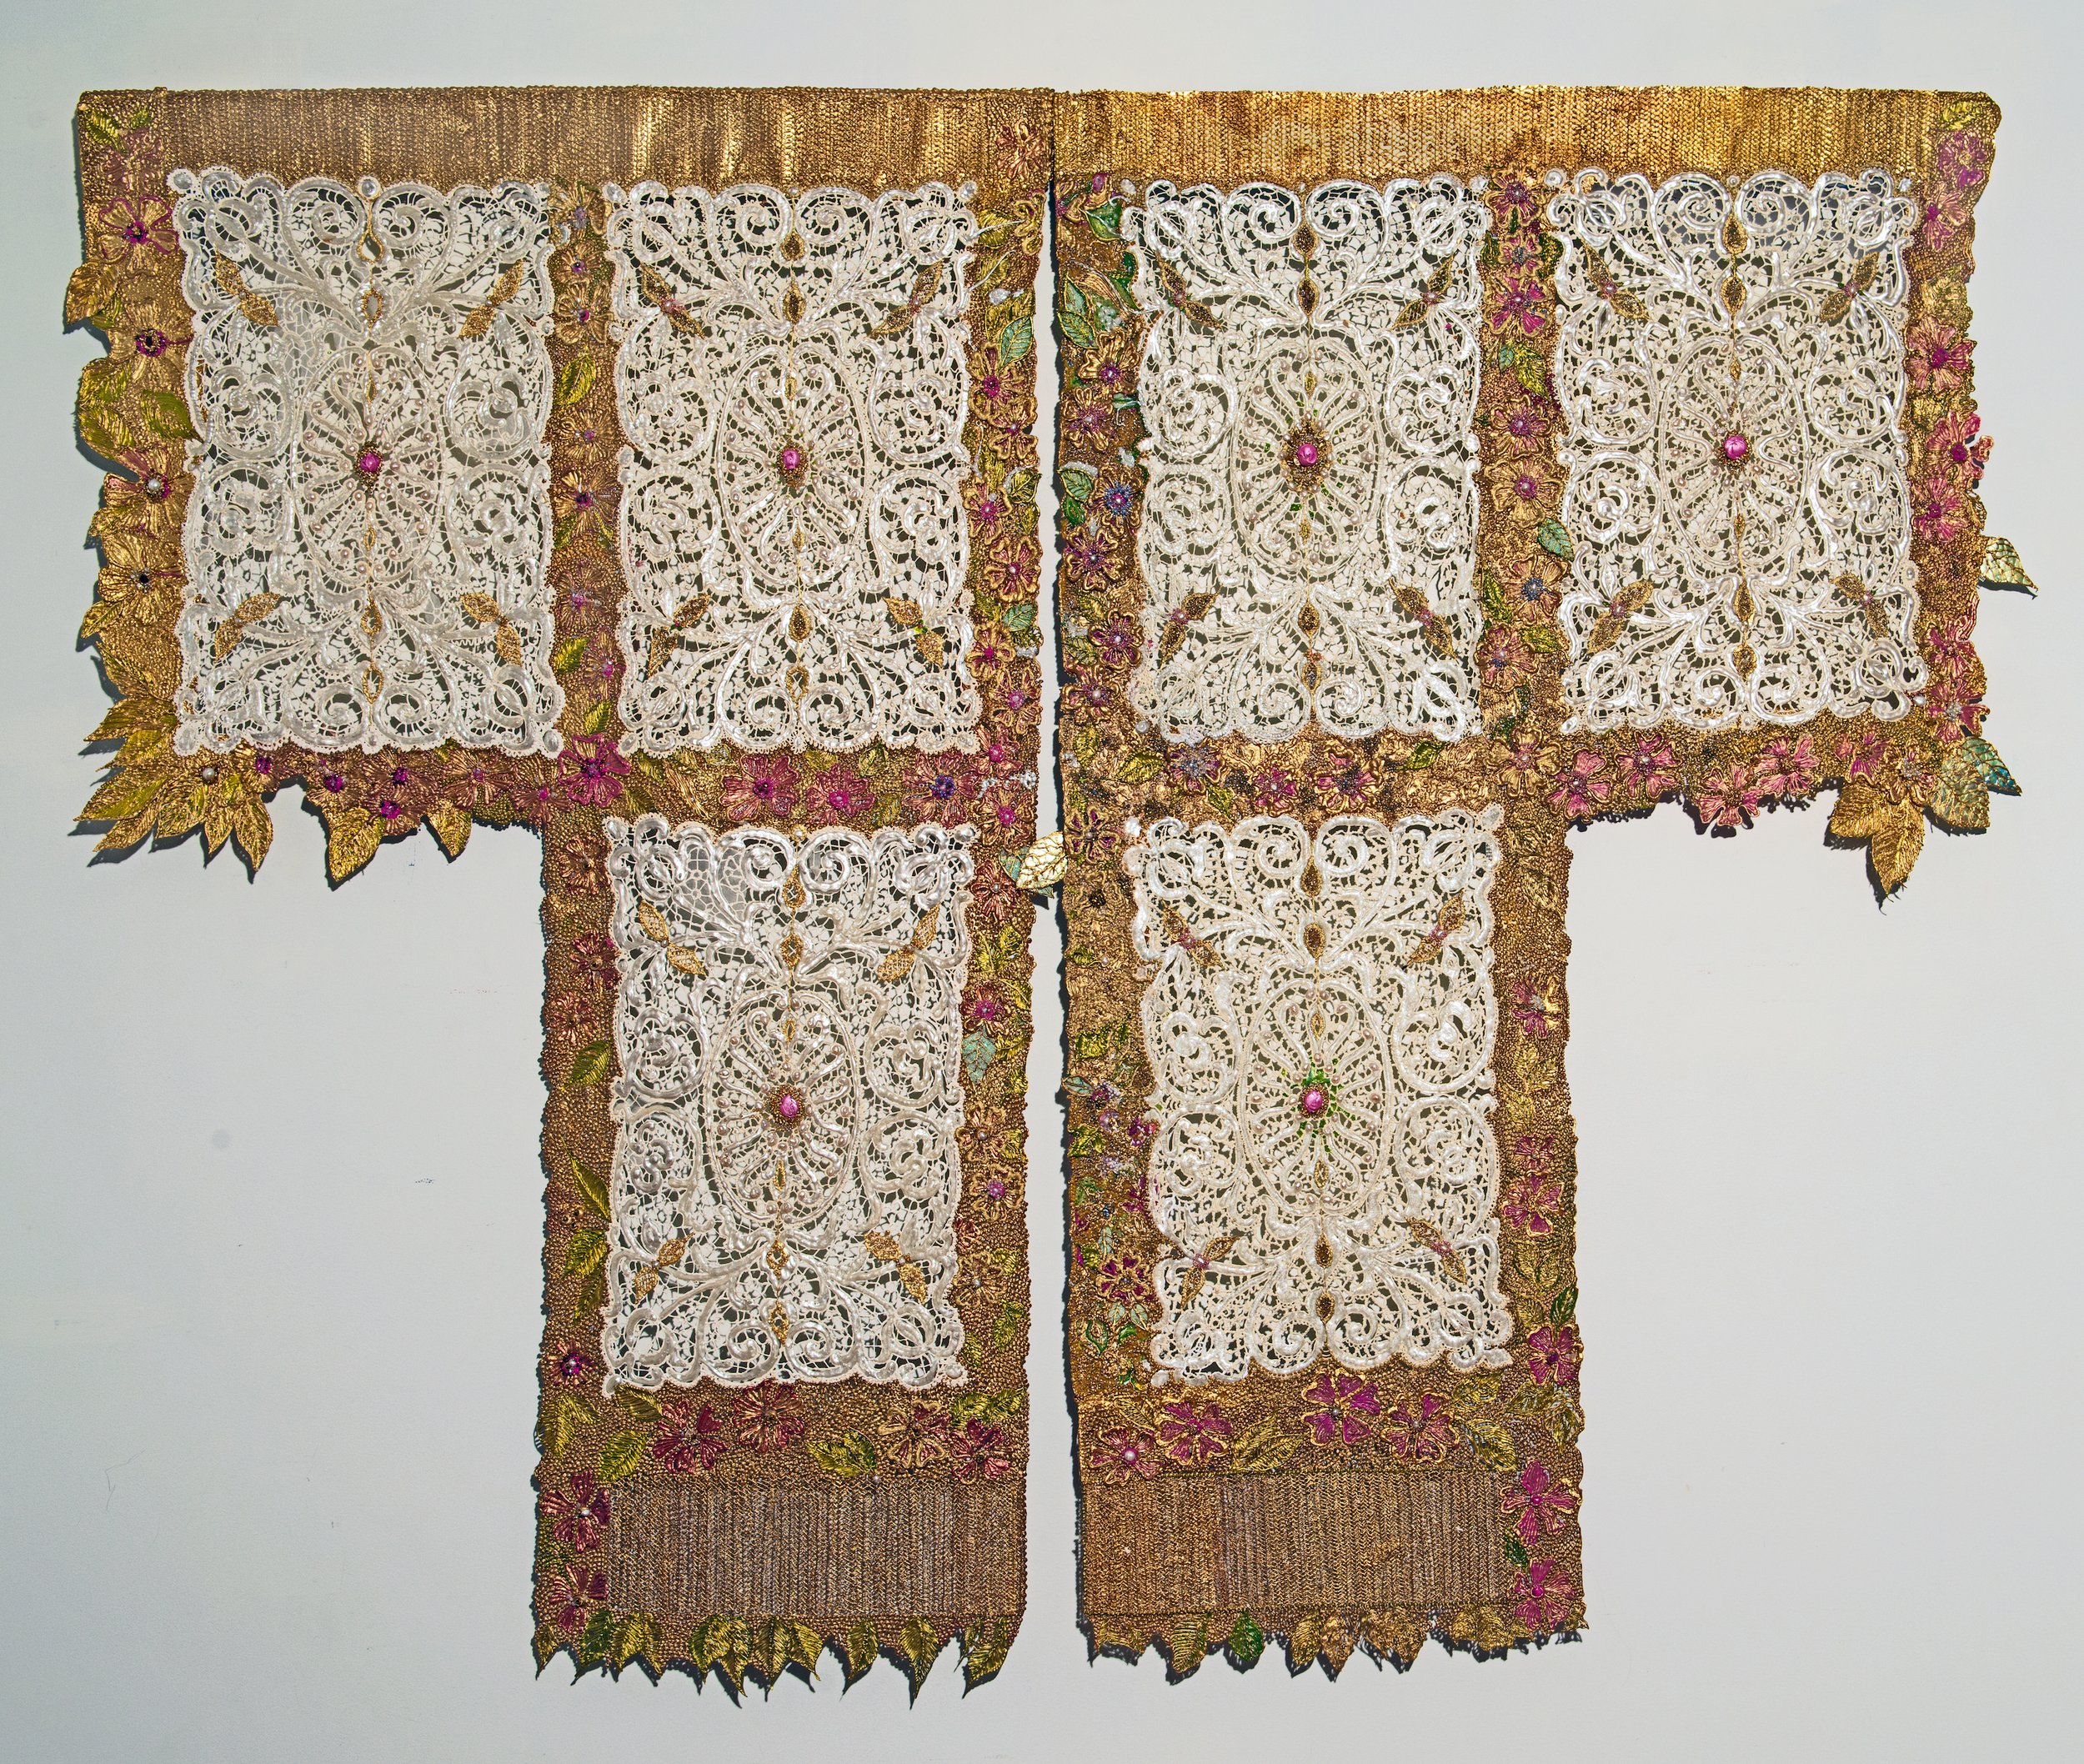 Double panel garment of acrylic paint lace, flowers, and leaves in white, gold, pink, and green.